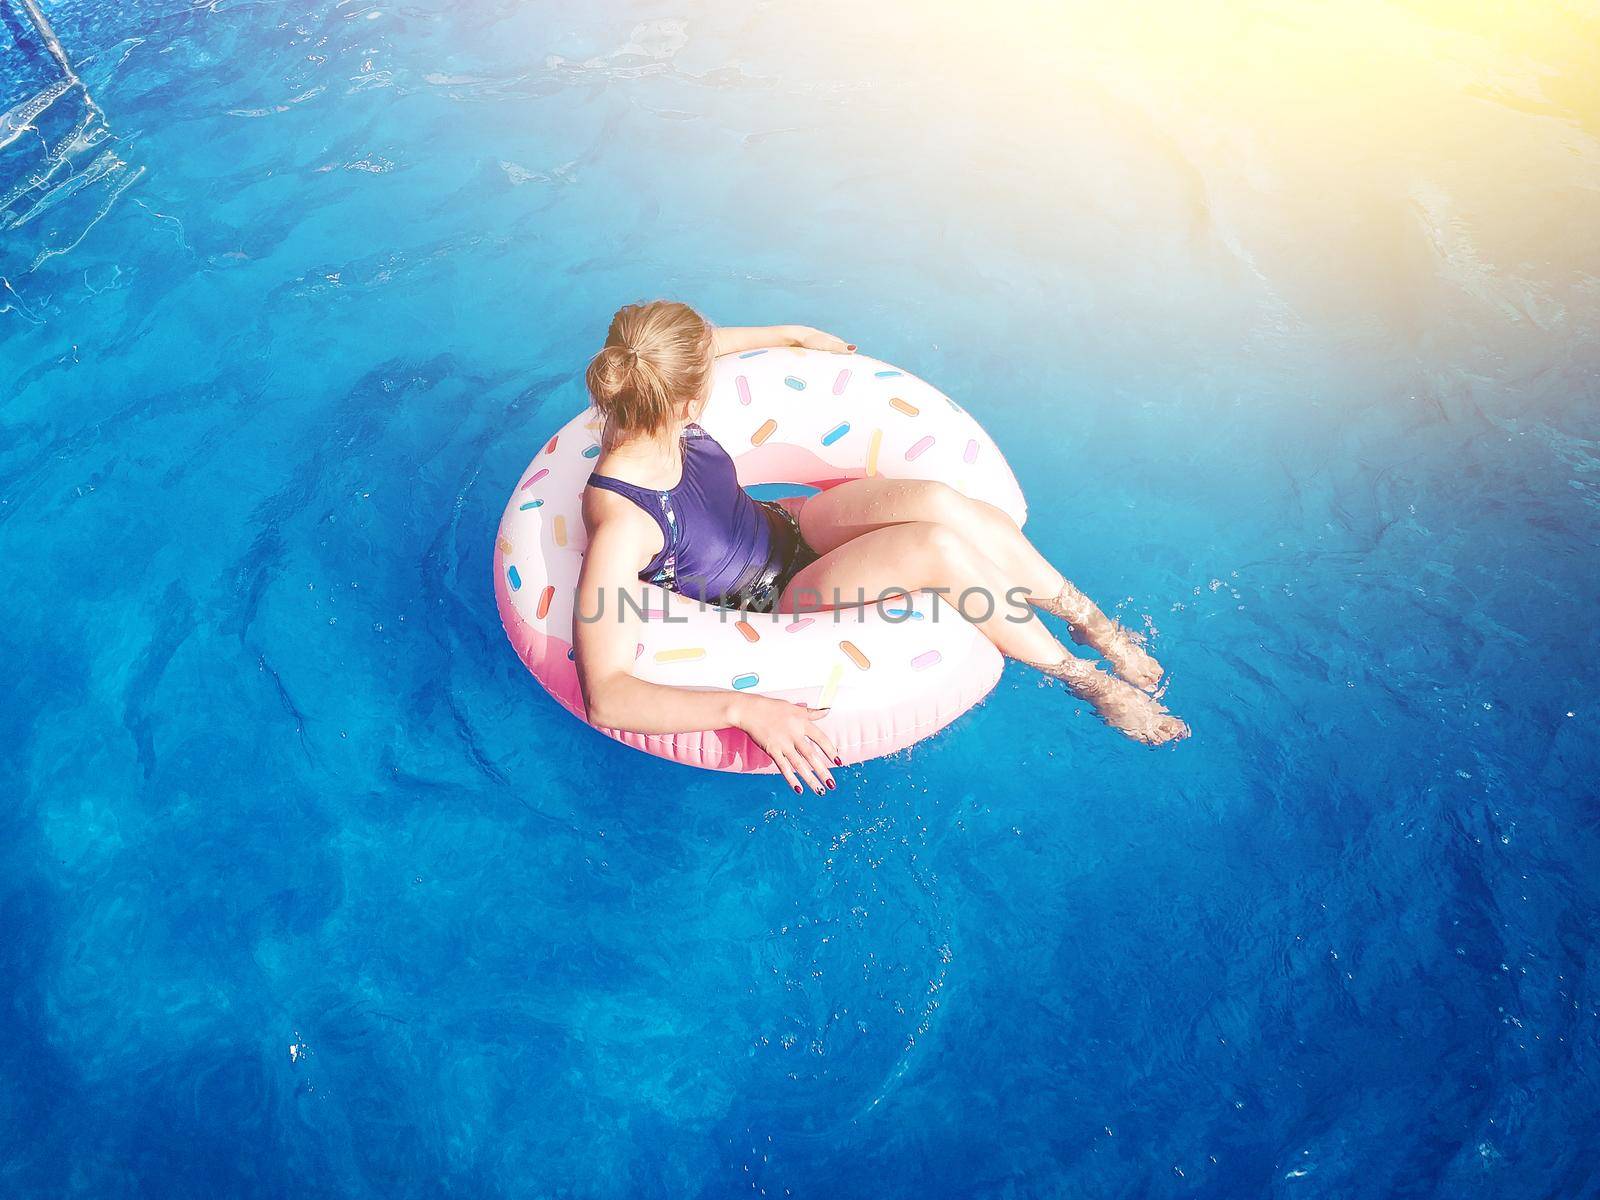 Summer warm vacation.The girl sits on a rubber ring in the form of donut in blue pool in the sun.Time to relax on an air mattress. Having fun in the water for a family vacation.Sea resort.Copy space.